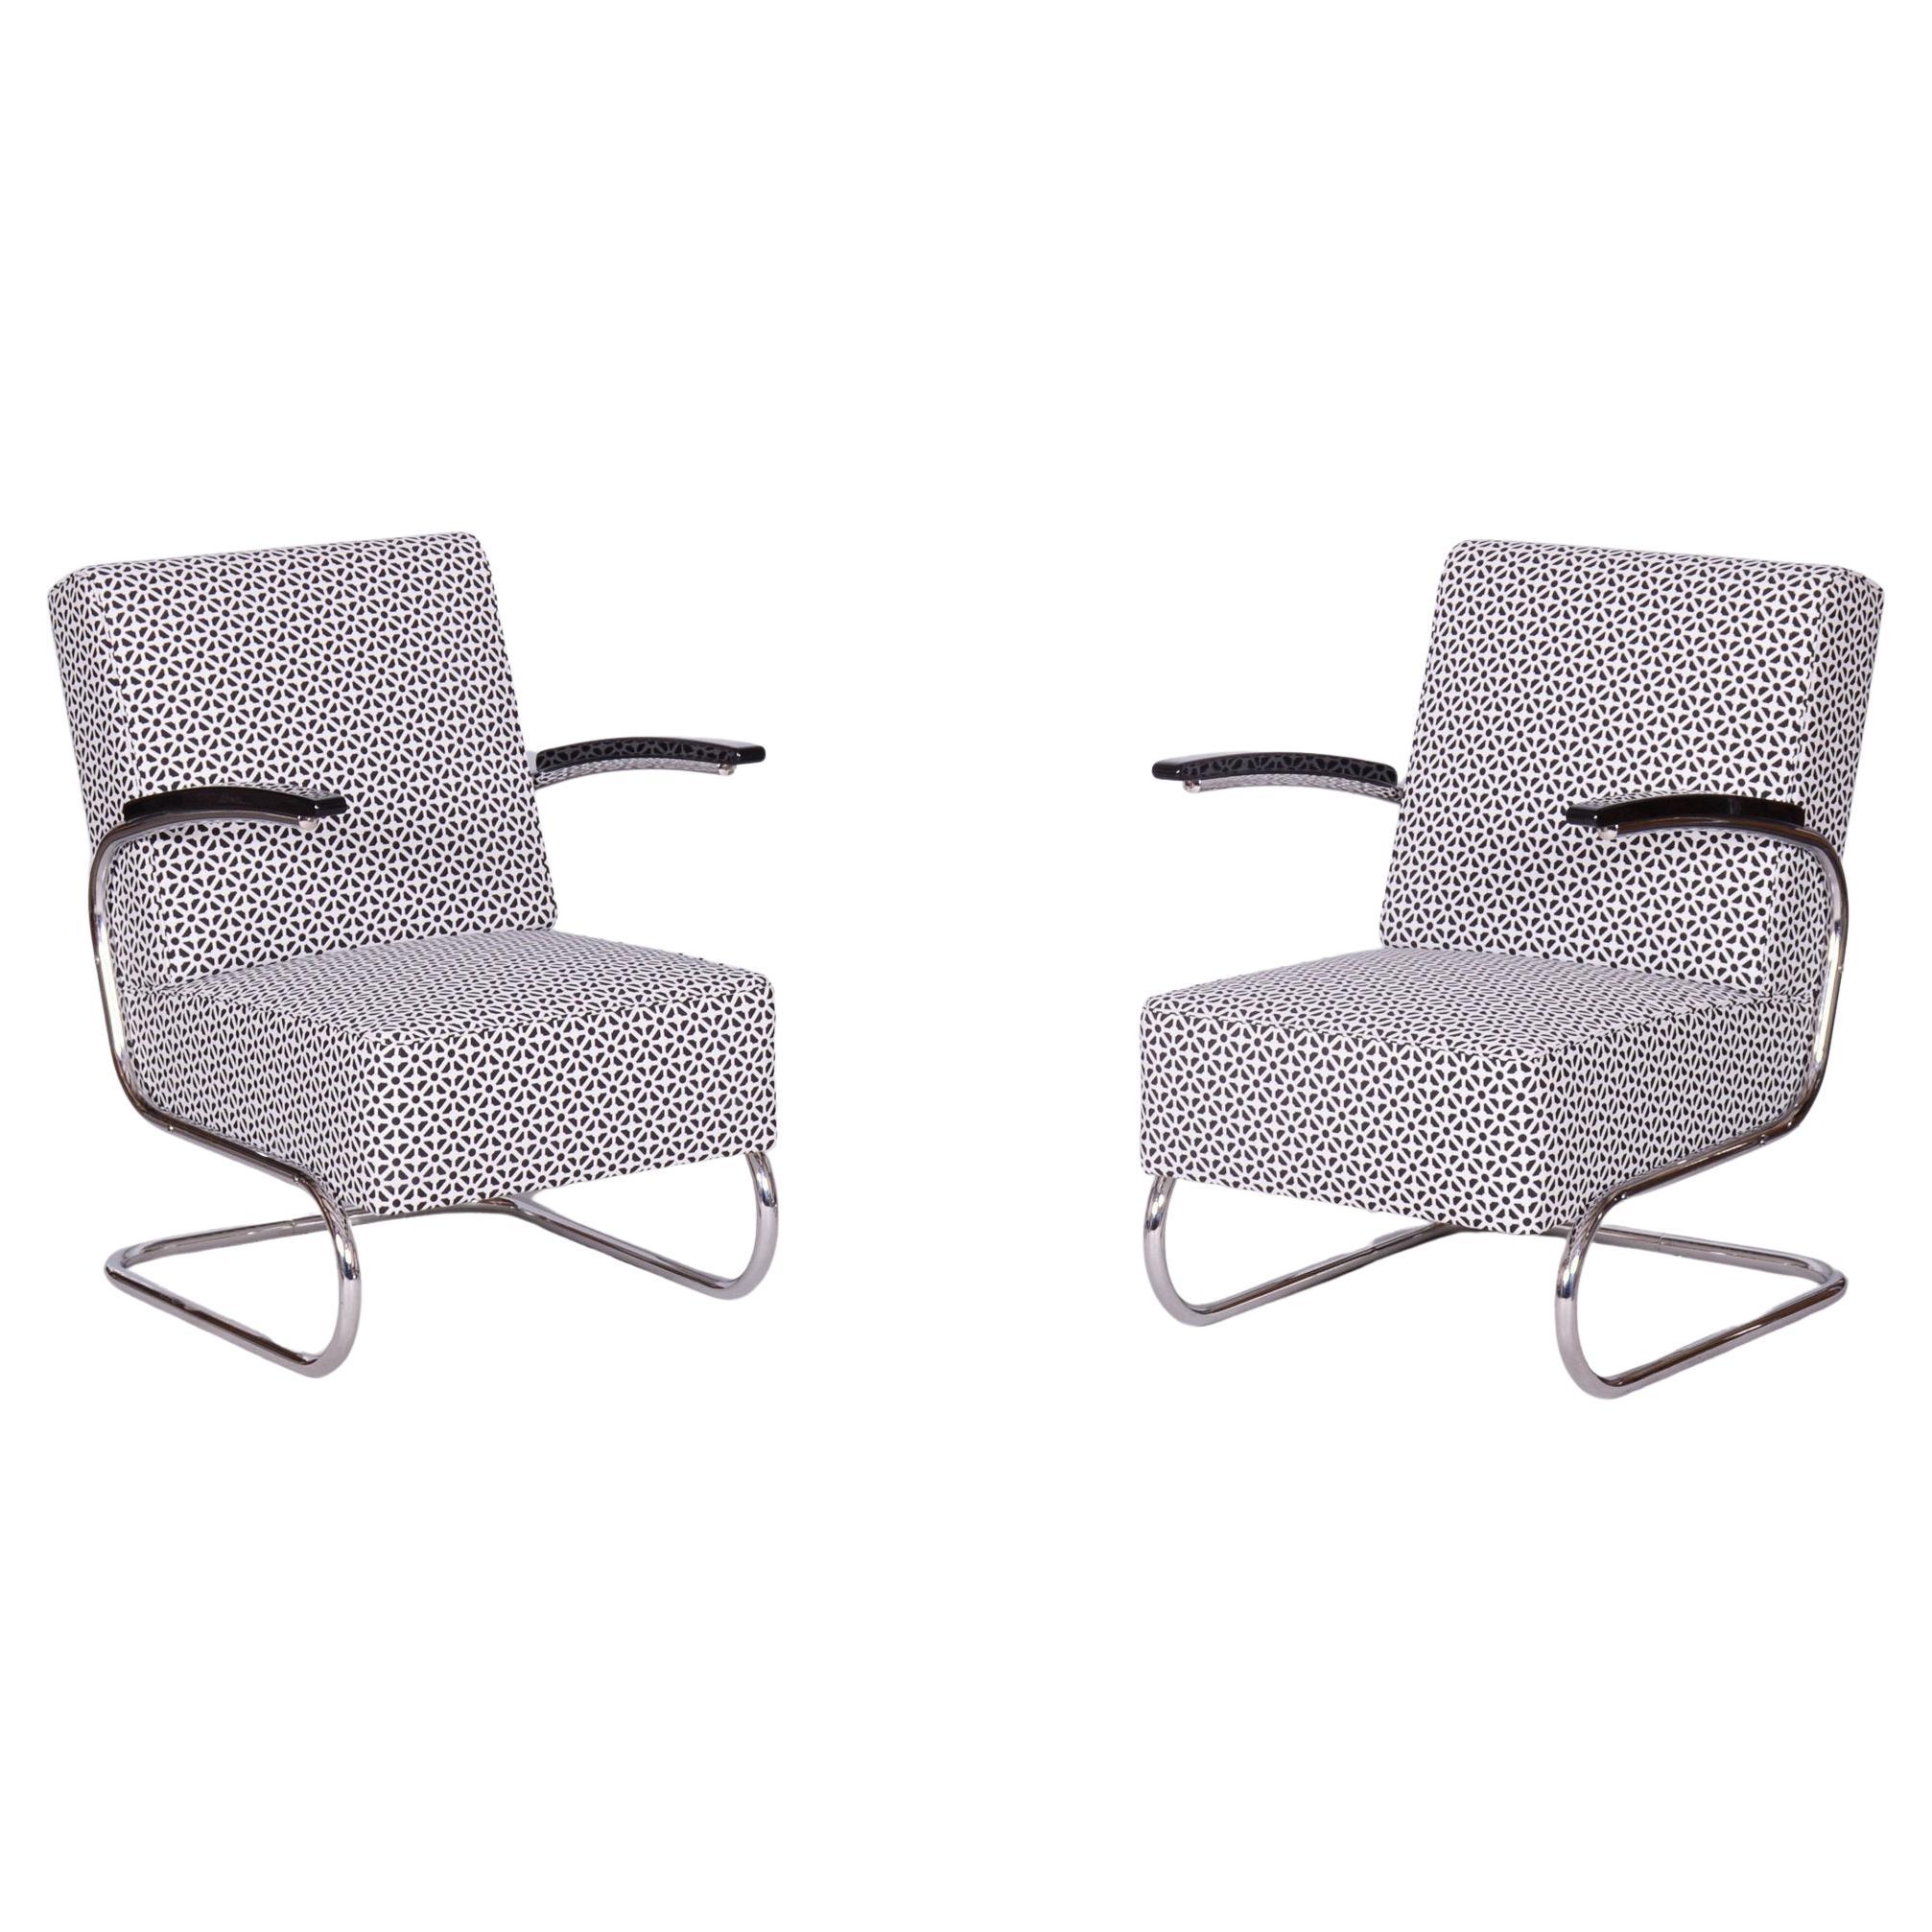 Set of Two Restored Bauhaus Armchairs, by Mücke Melder, Chrome, Czech, 1930s For Sale